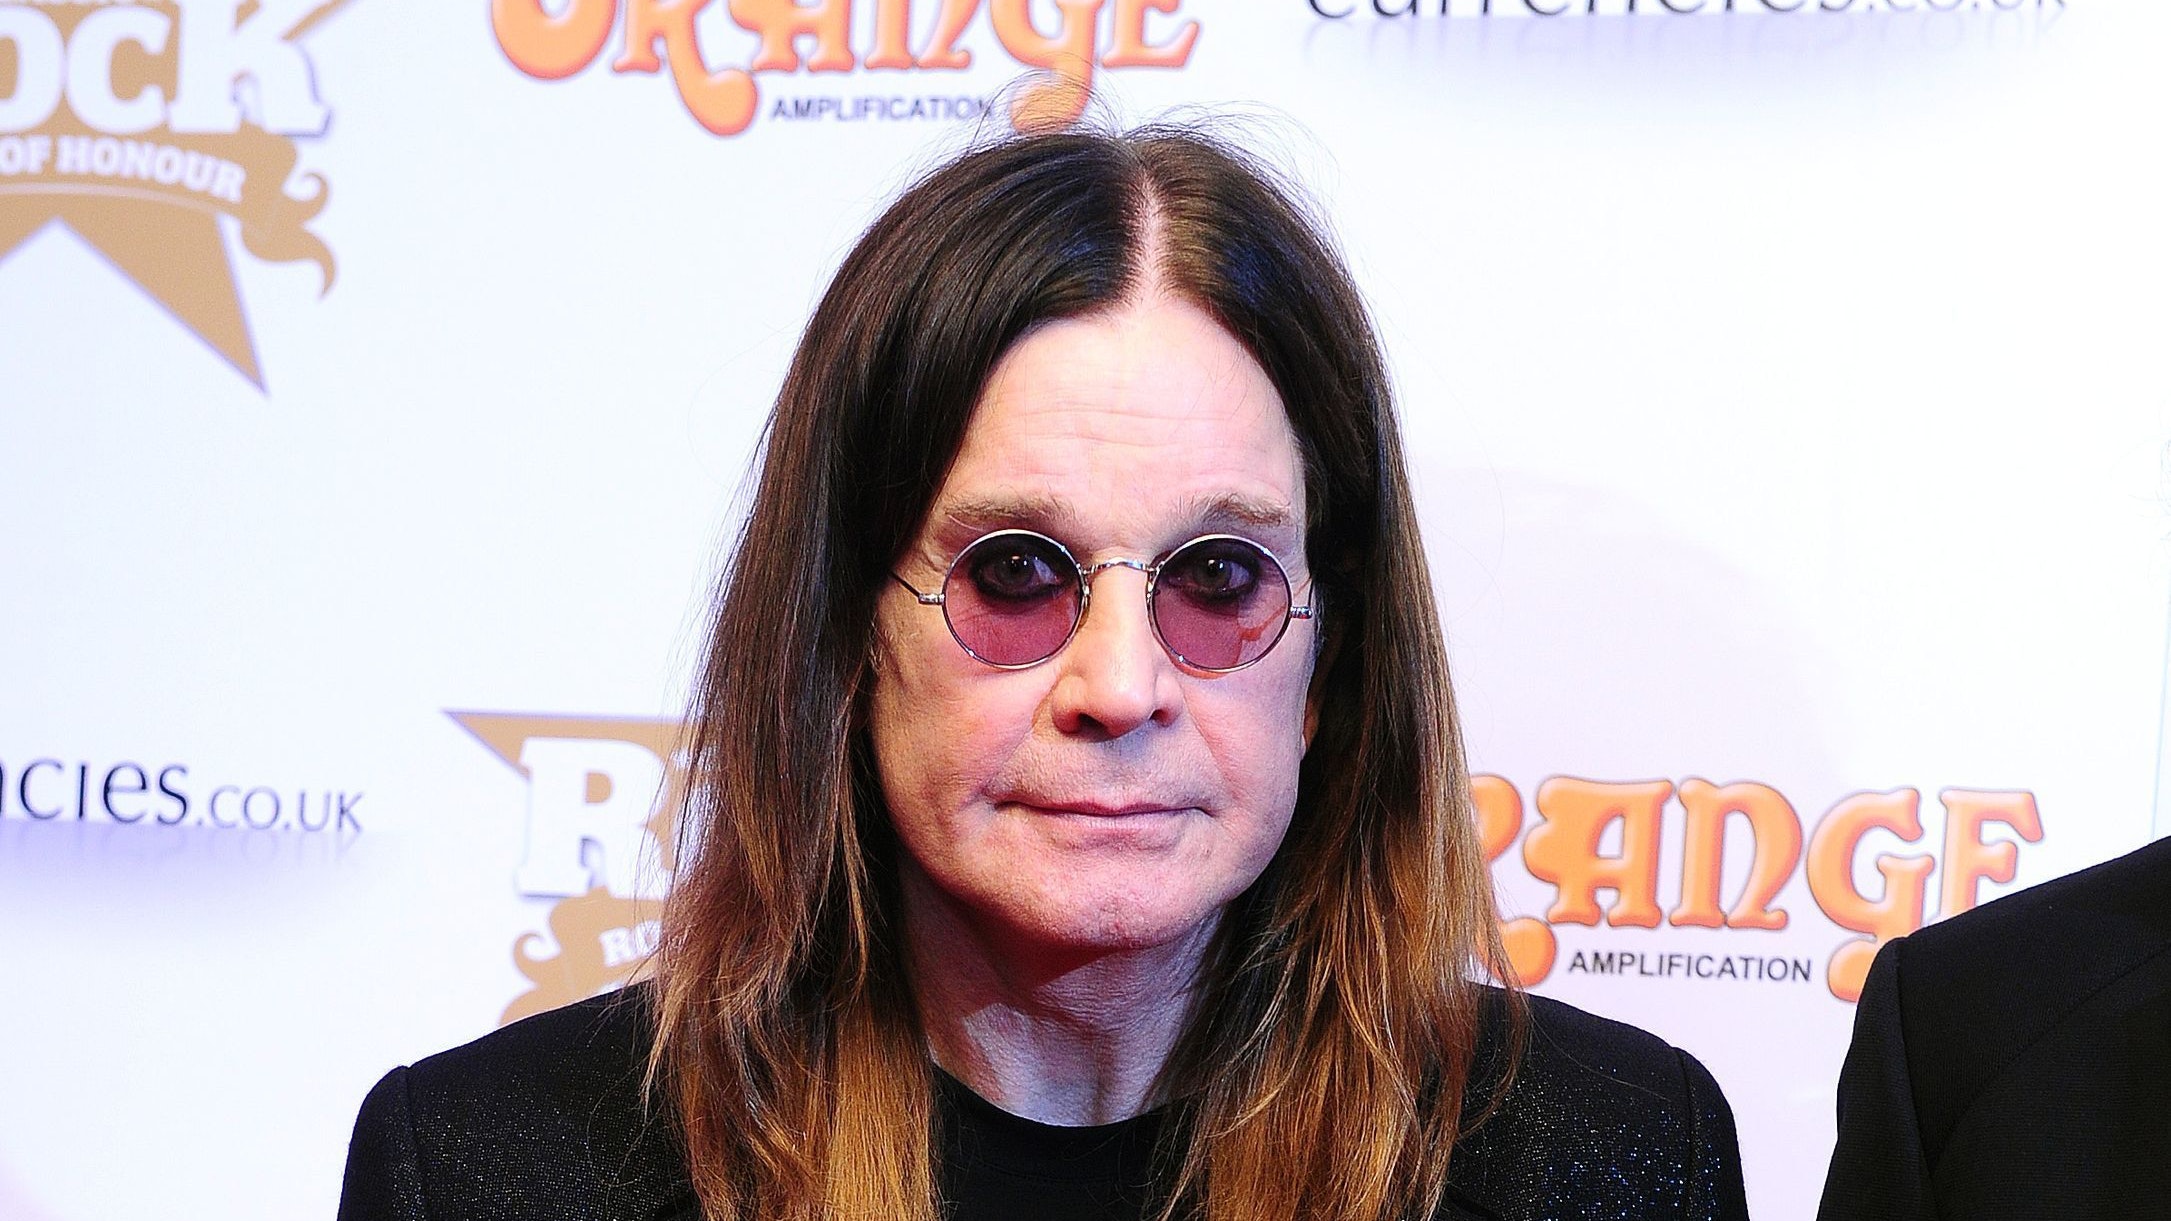 Ozzy Osbourne relives his fight to get sober in new music video | BT2171 x 1221